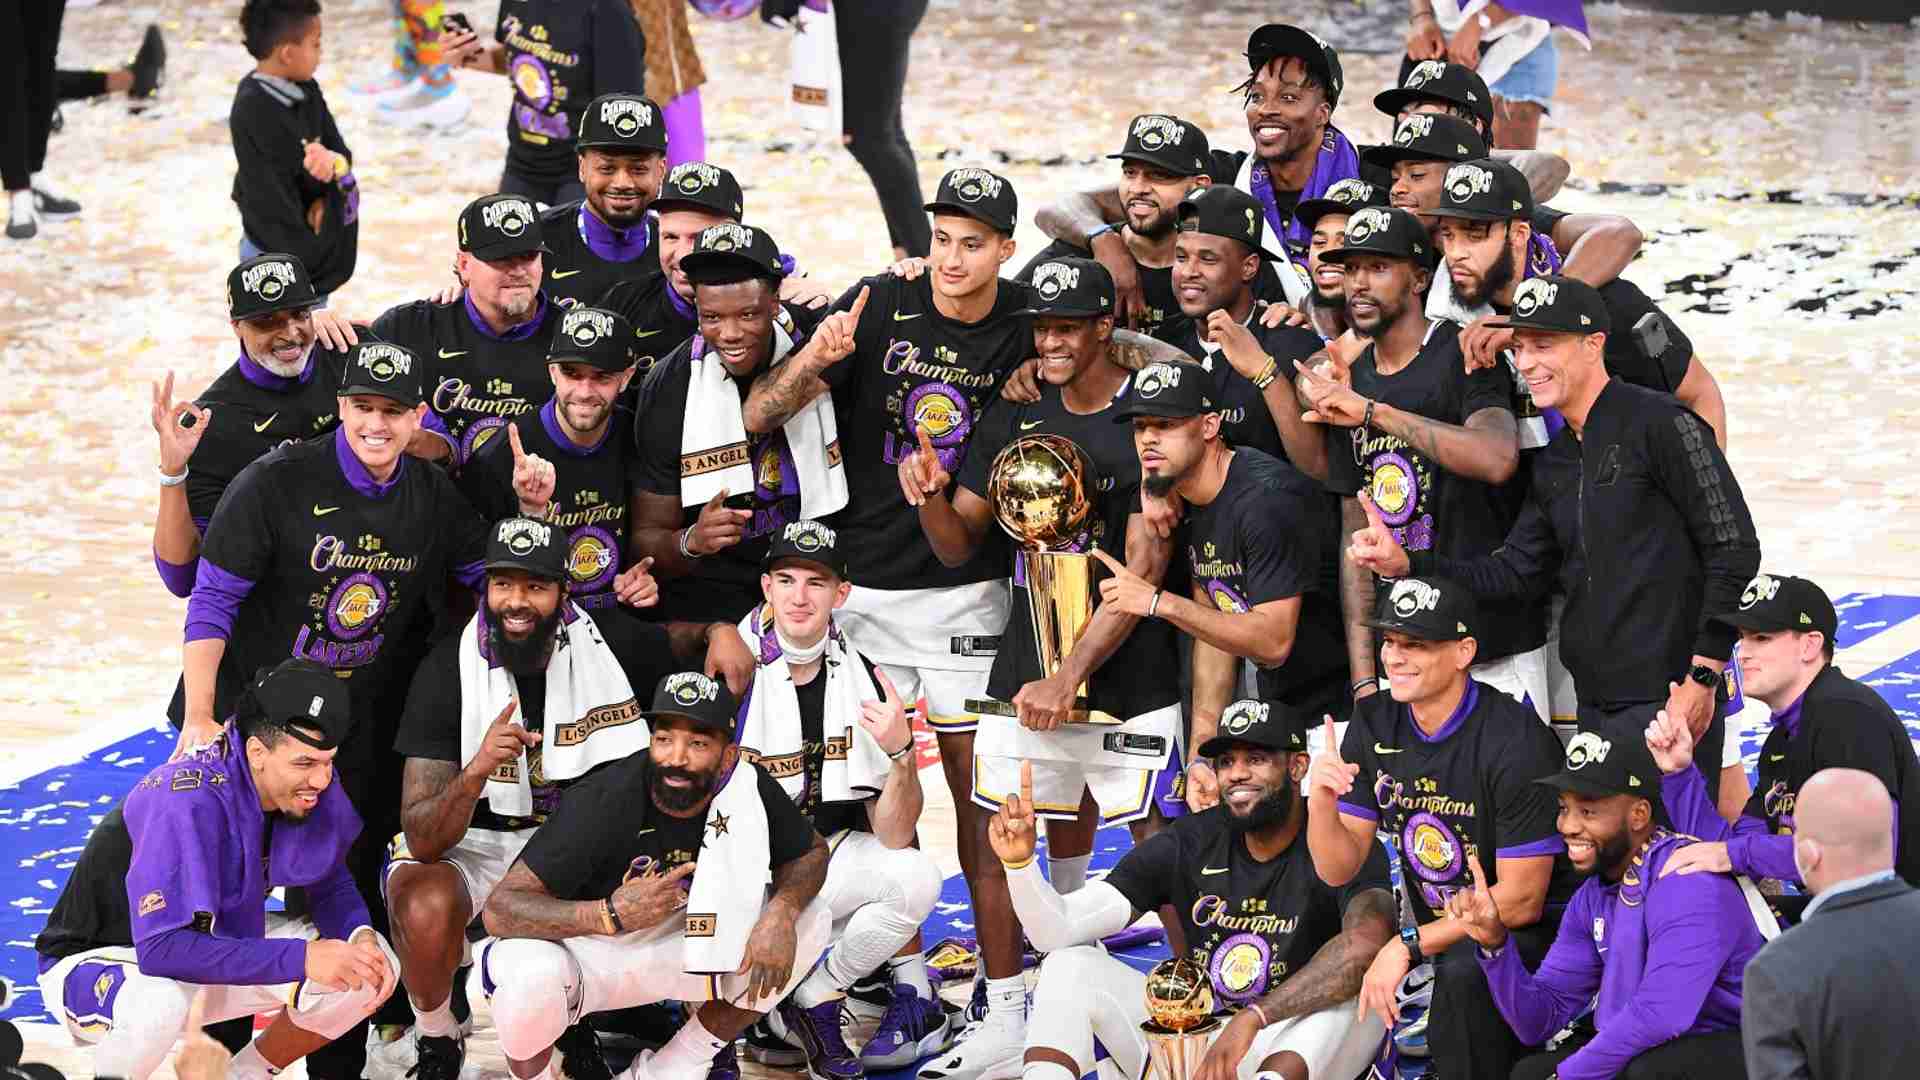 Los Angeles Lakers celebrating. (Image credits: twitter)